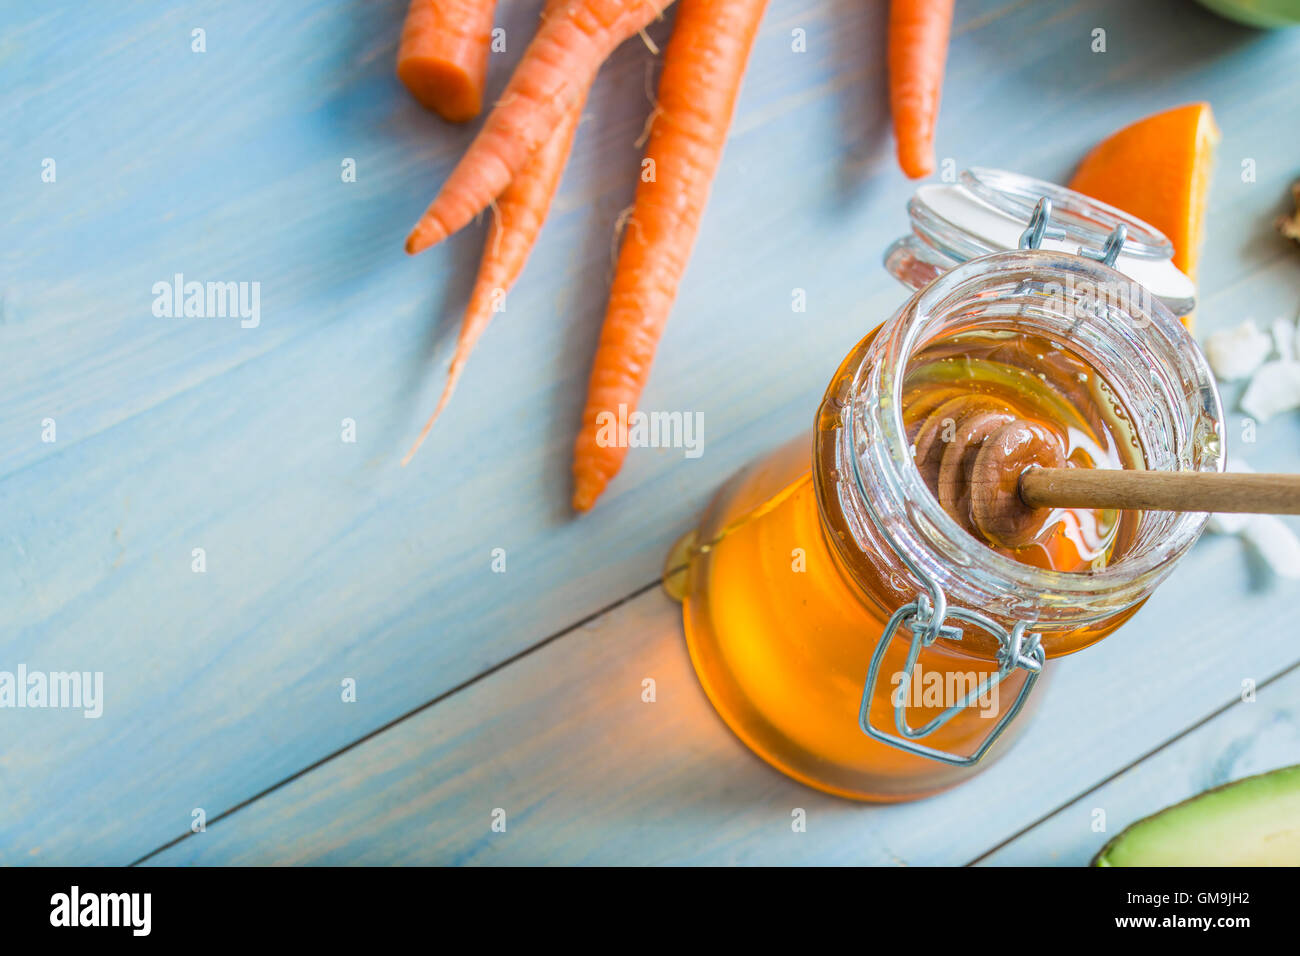 High angle view of jar of honey and carrots Stock Photo